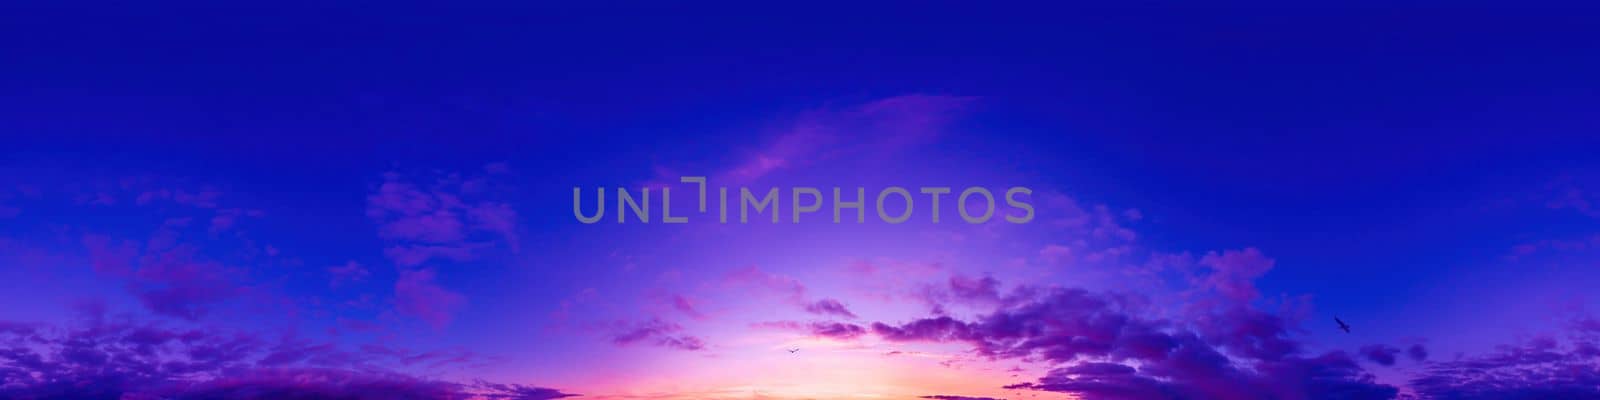 Dark blue magenta twilight sky panorama with Cumulus clouds. Seamless hdr 360 panorama in spherical equiangular format. Full zenith or sky dome for 3D visualization, sky replacement for aerial drone panoramas by Matiunina